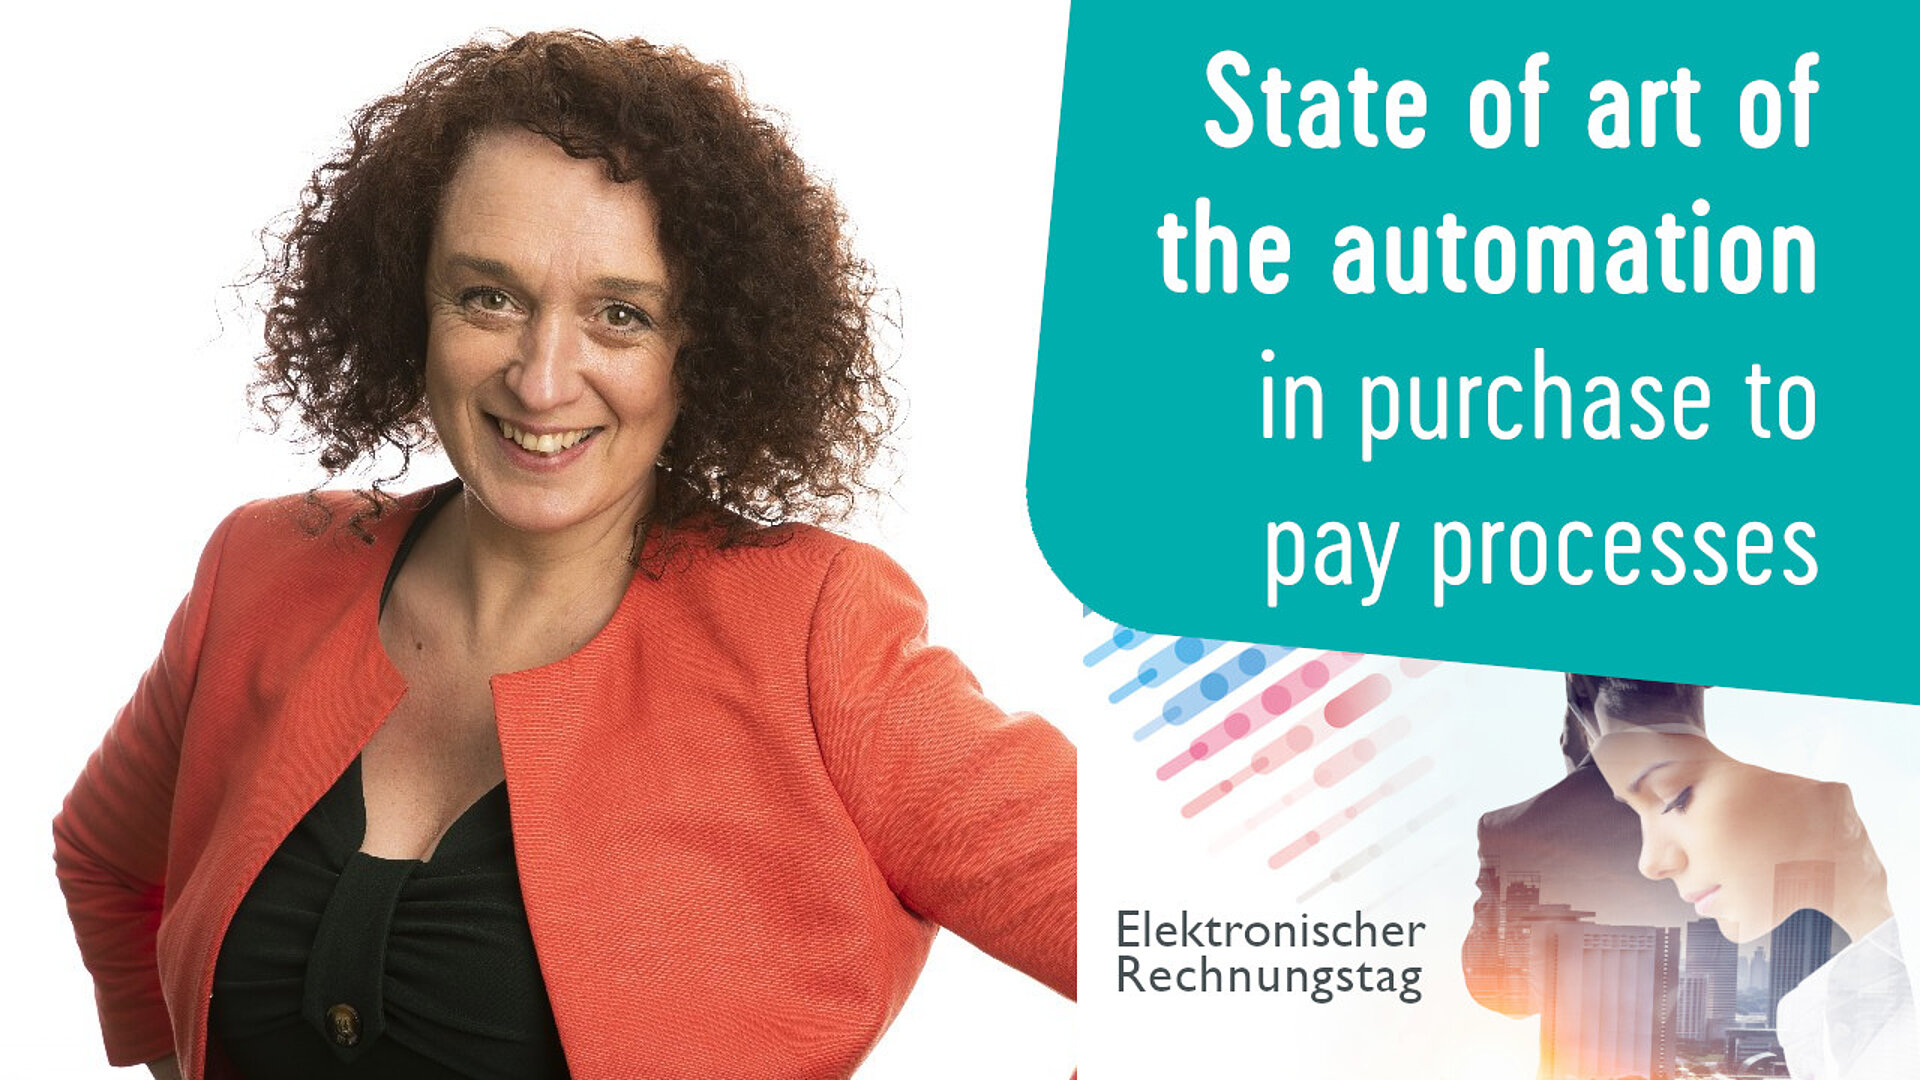 State of art of the automation in purchase to pay processes